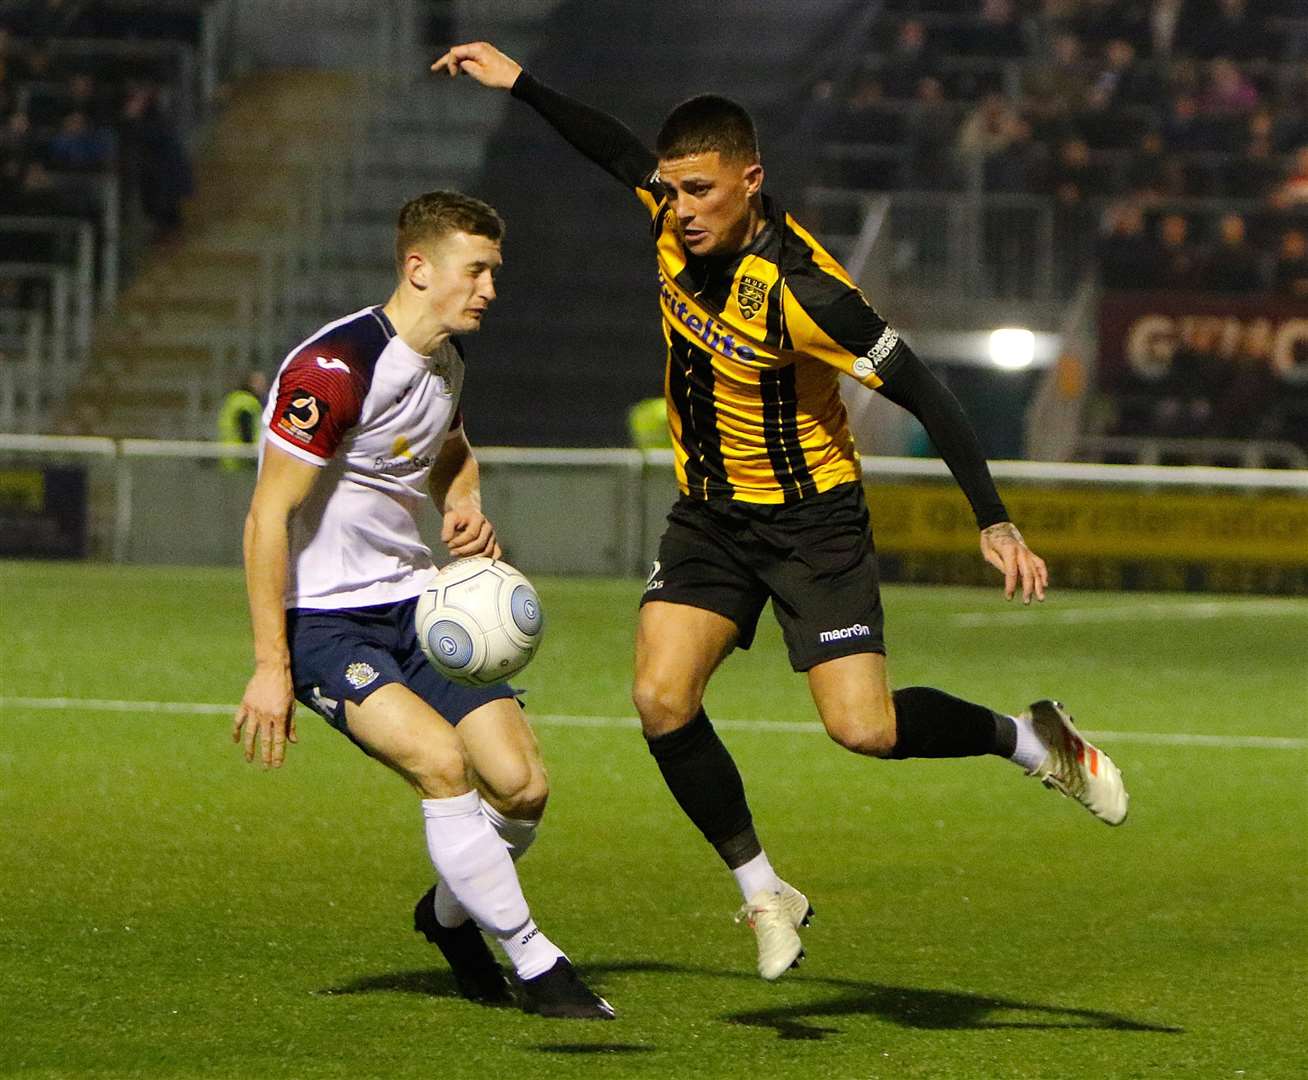 Jack Paxman in the thick of it for Maidstone Picture: Andy Jones